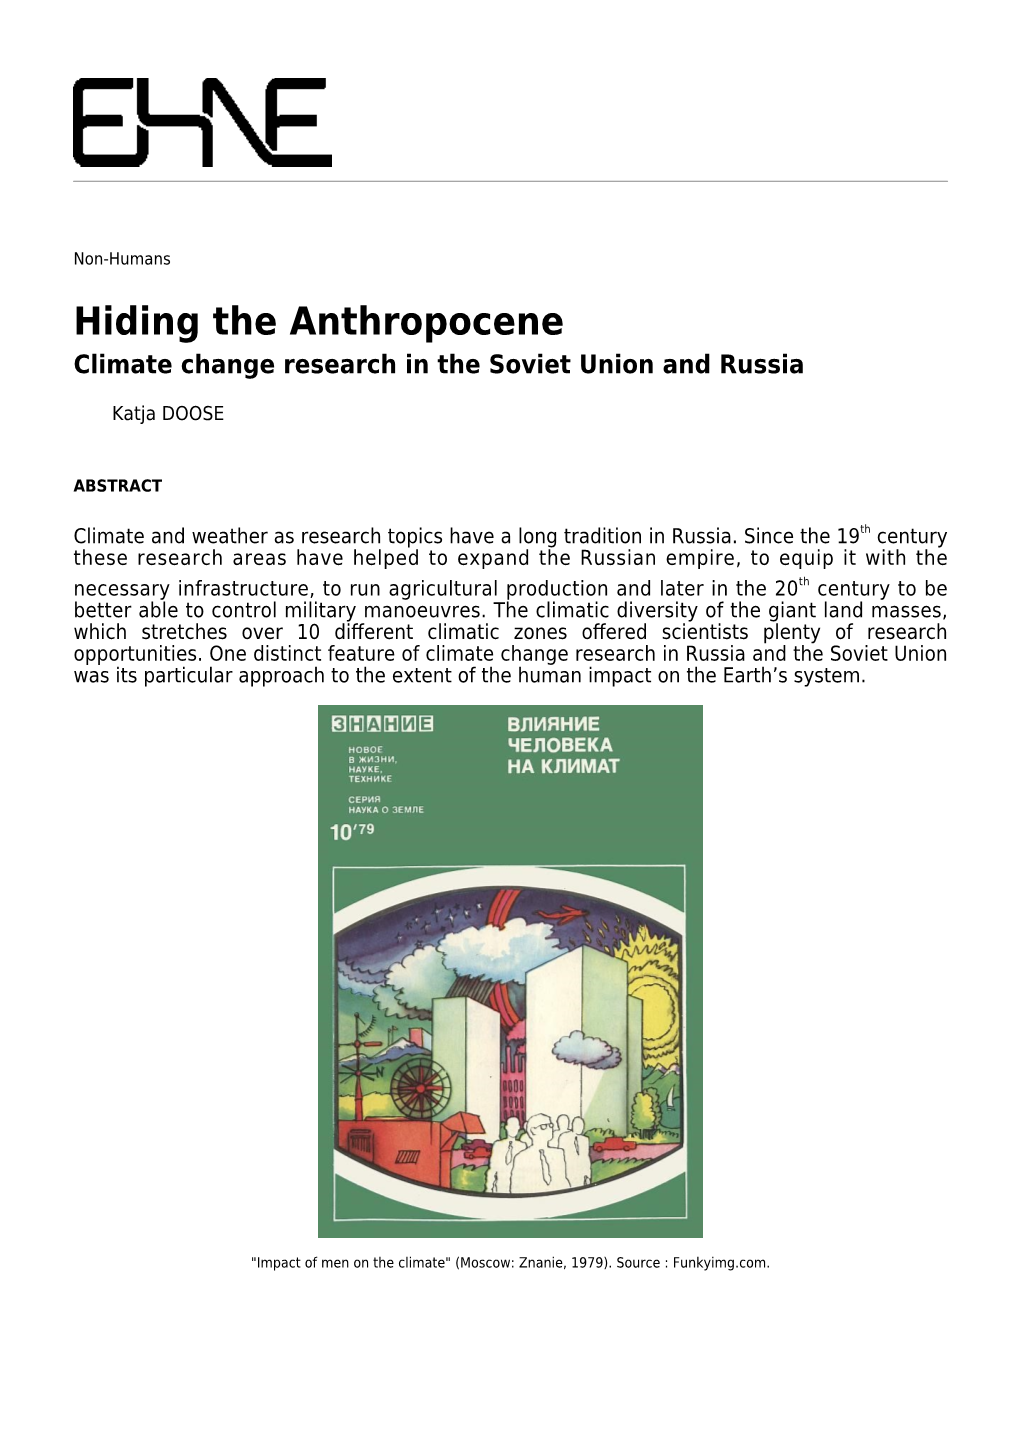 Hiding the Anthropocene Climate Change Research in the Soviet Union and Russia